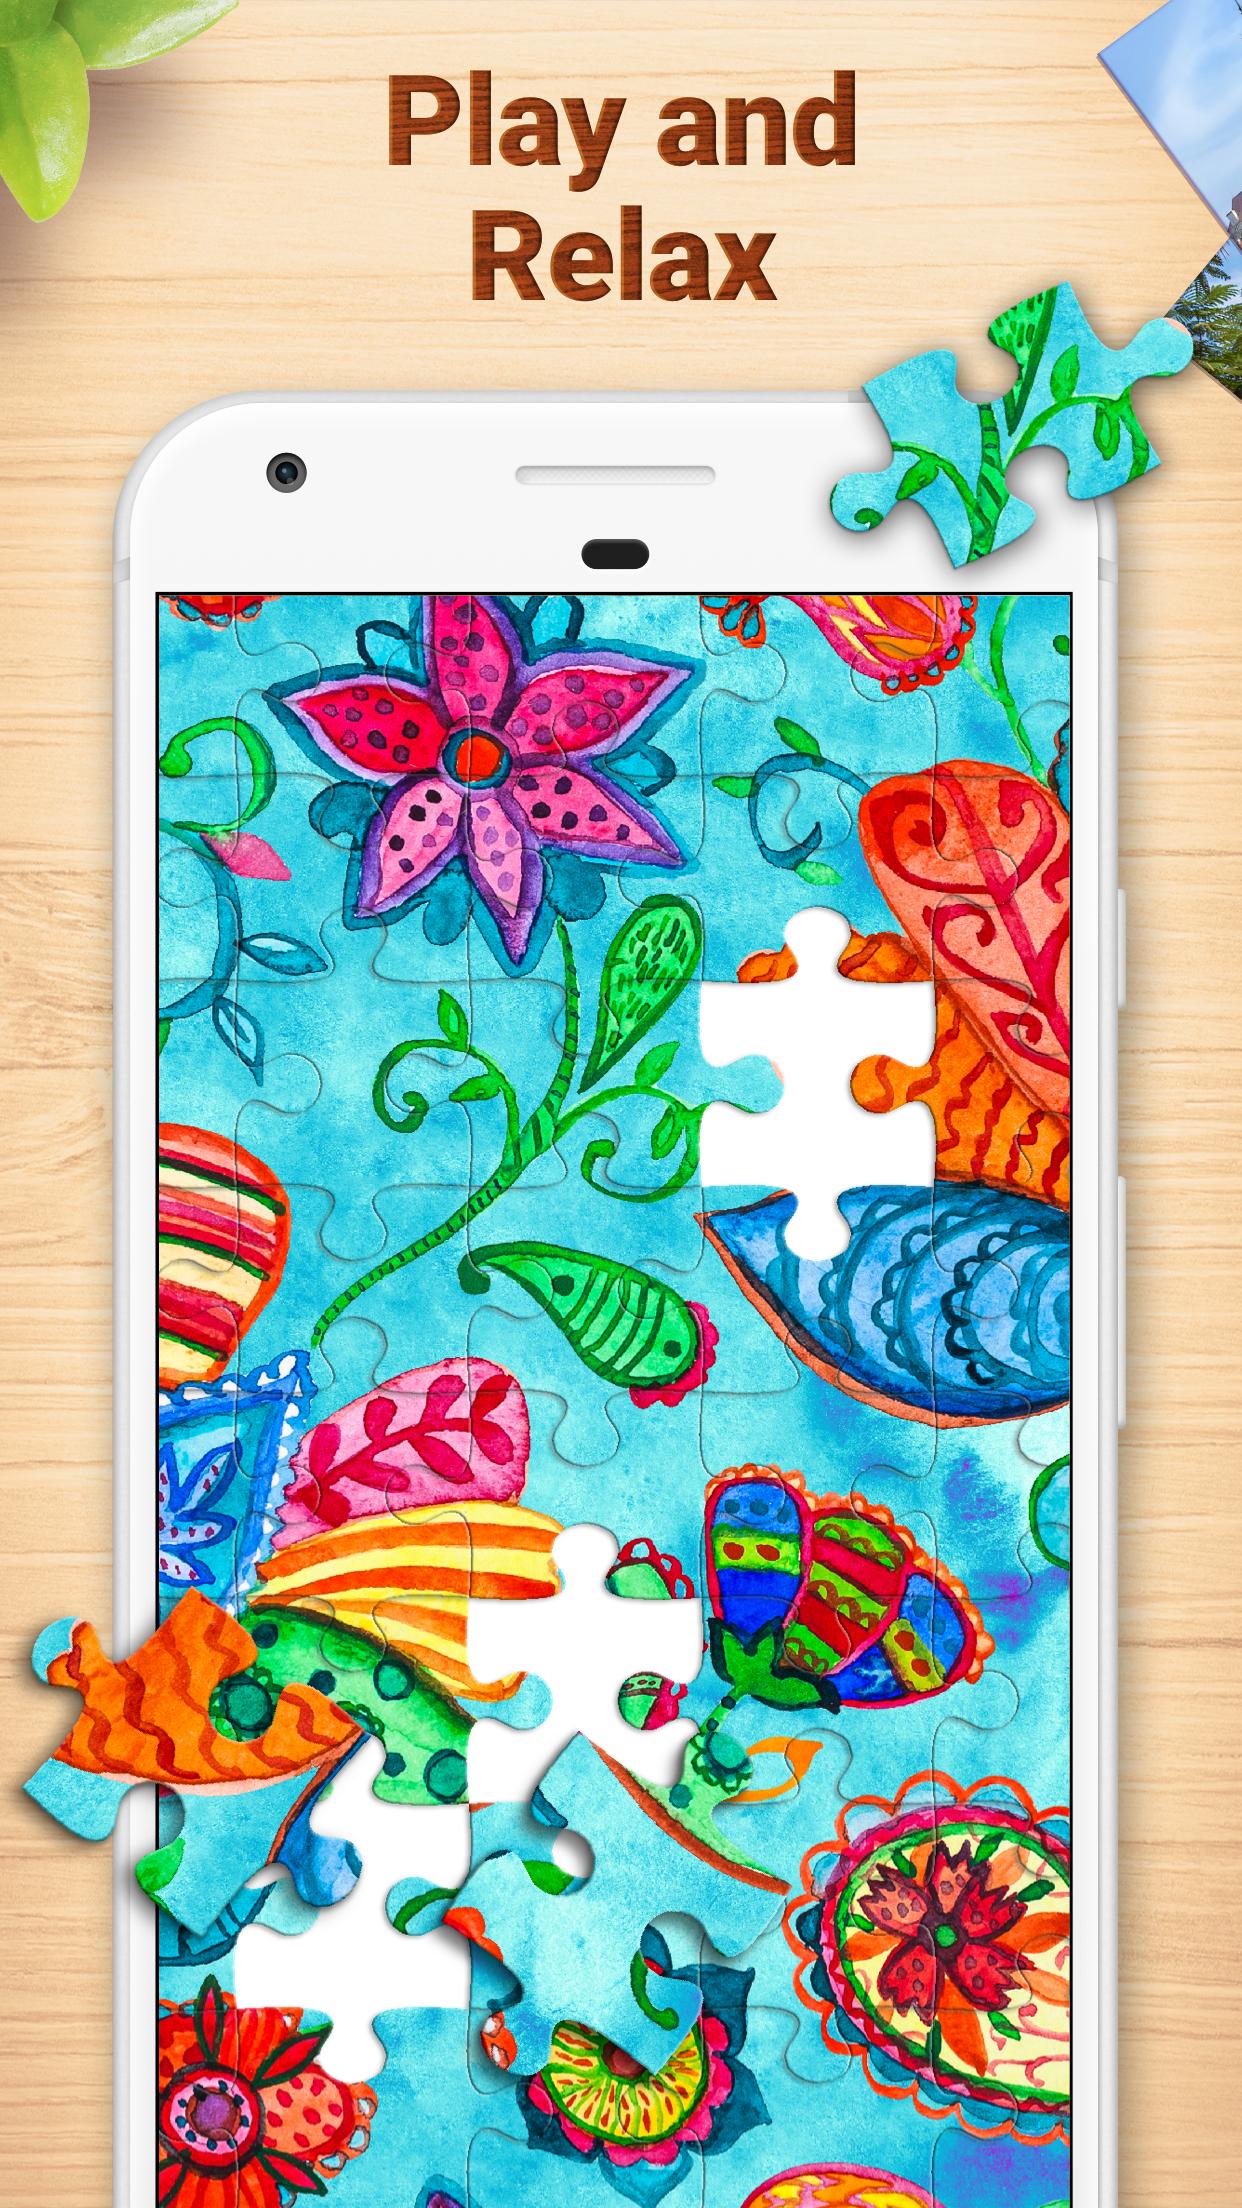 Jigsaw Puzzles Puzzle Game 2.2.3 Screenshot 8